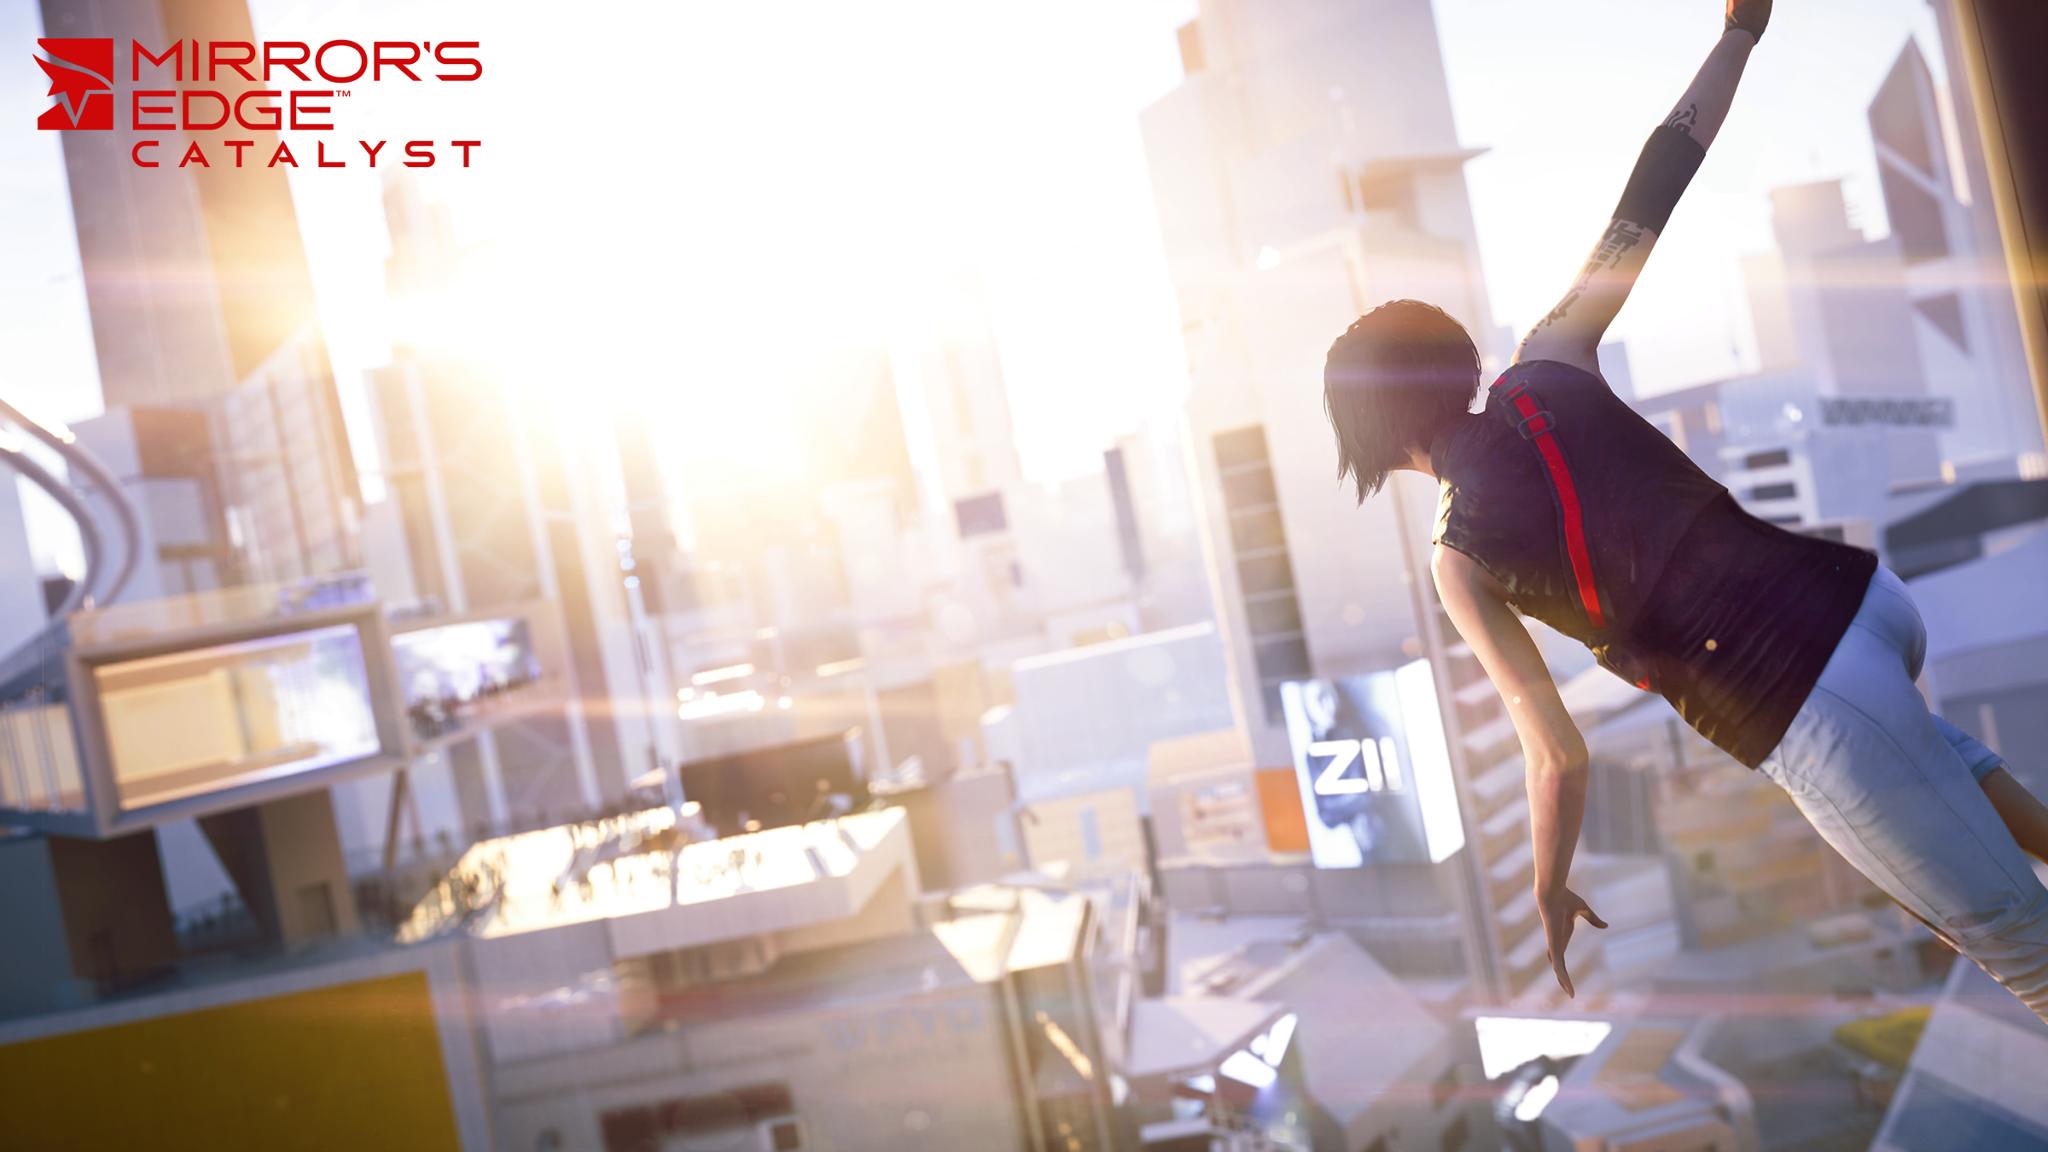 Mirror's Edge' Video Game To Be Adapted For TV By Endemol Shine – Deadline